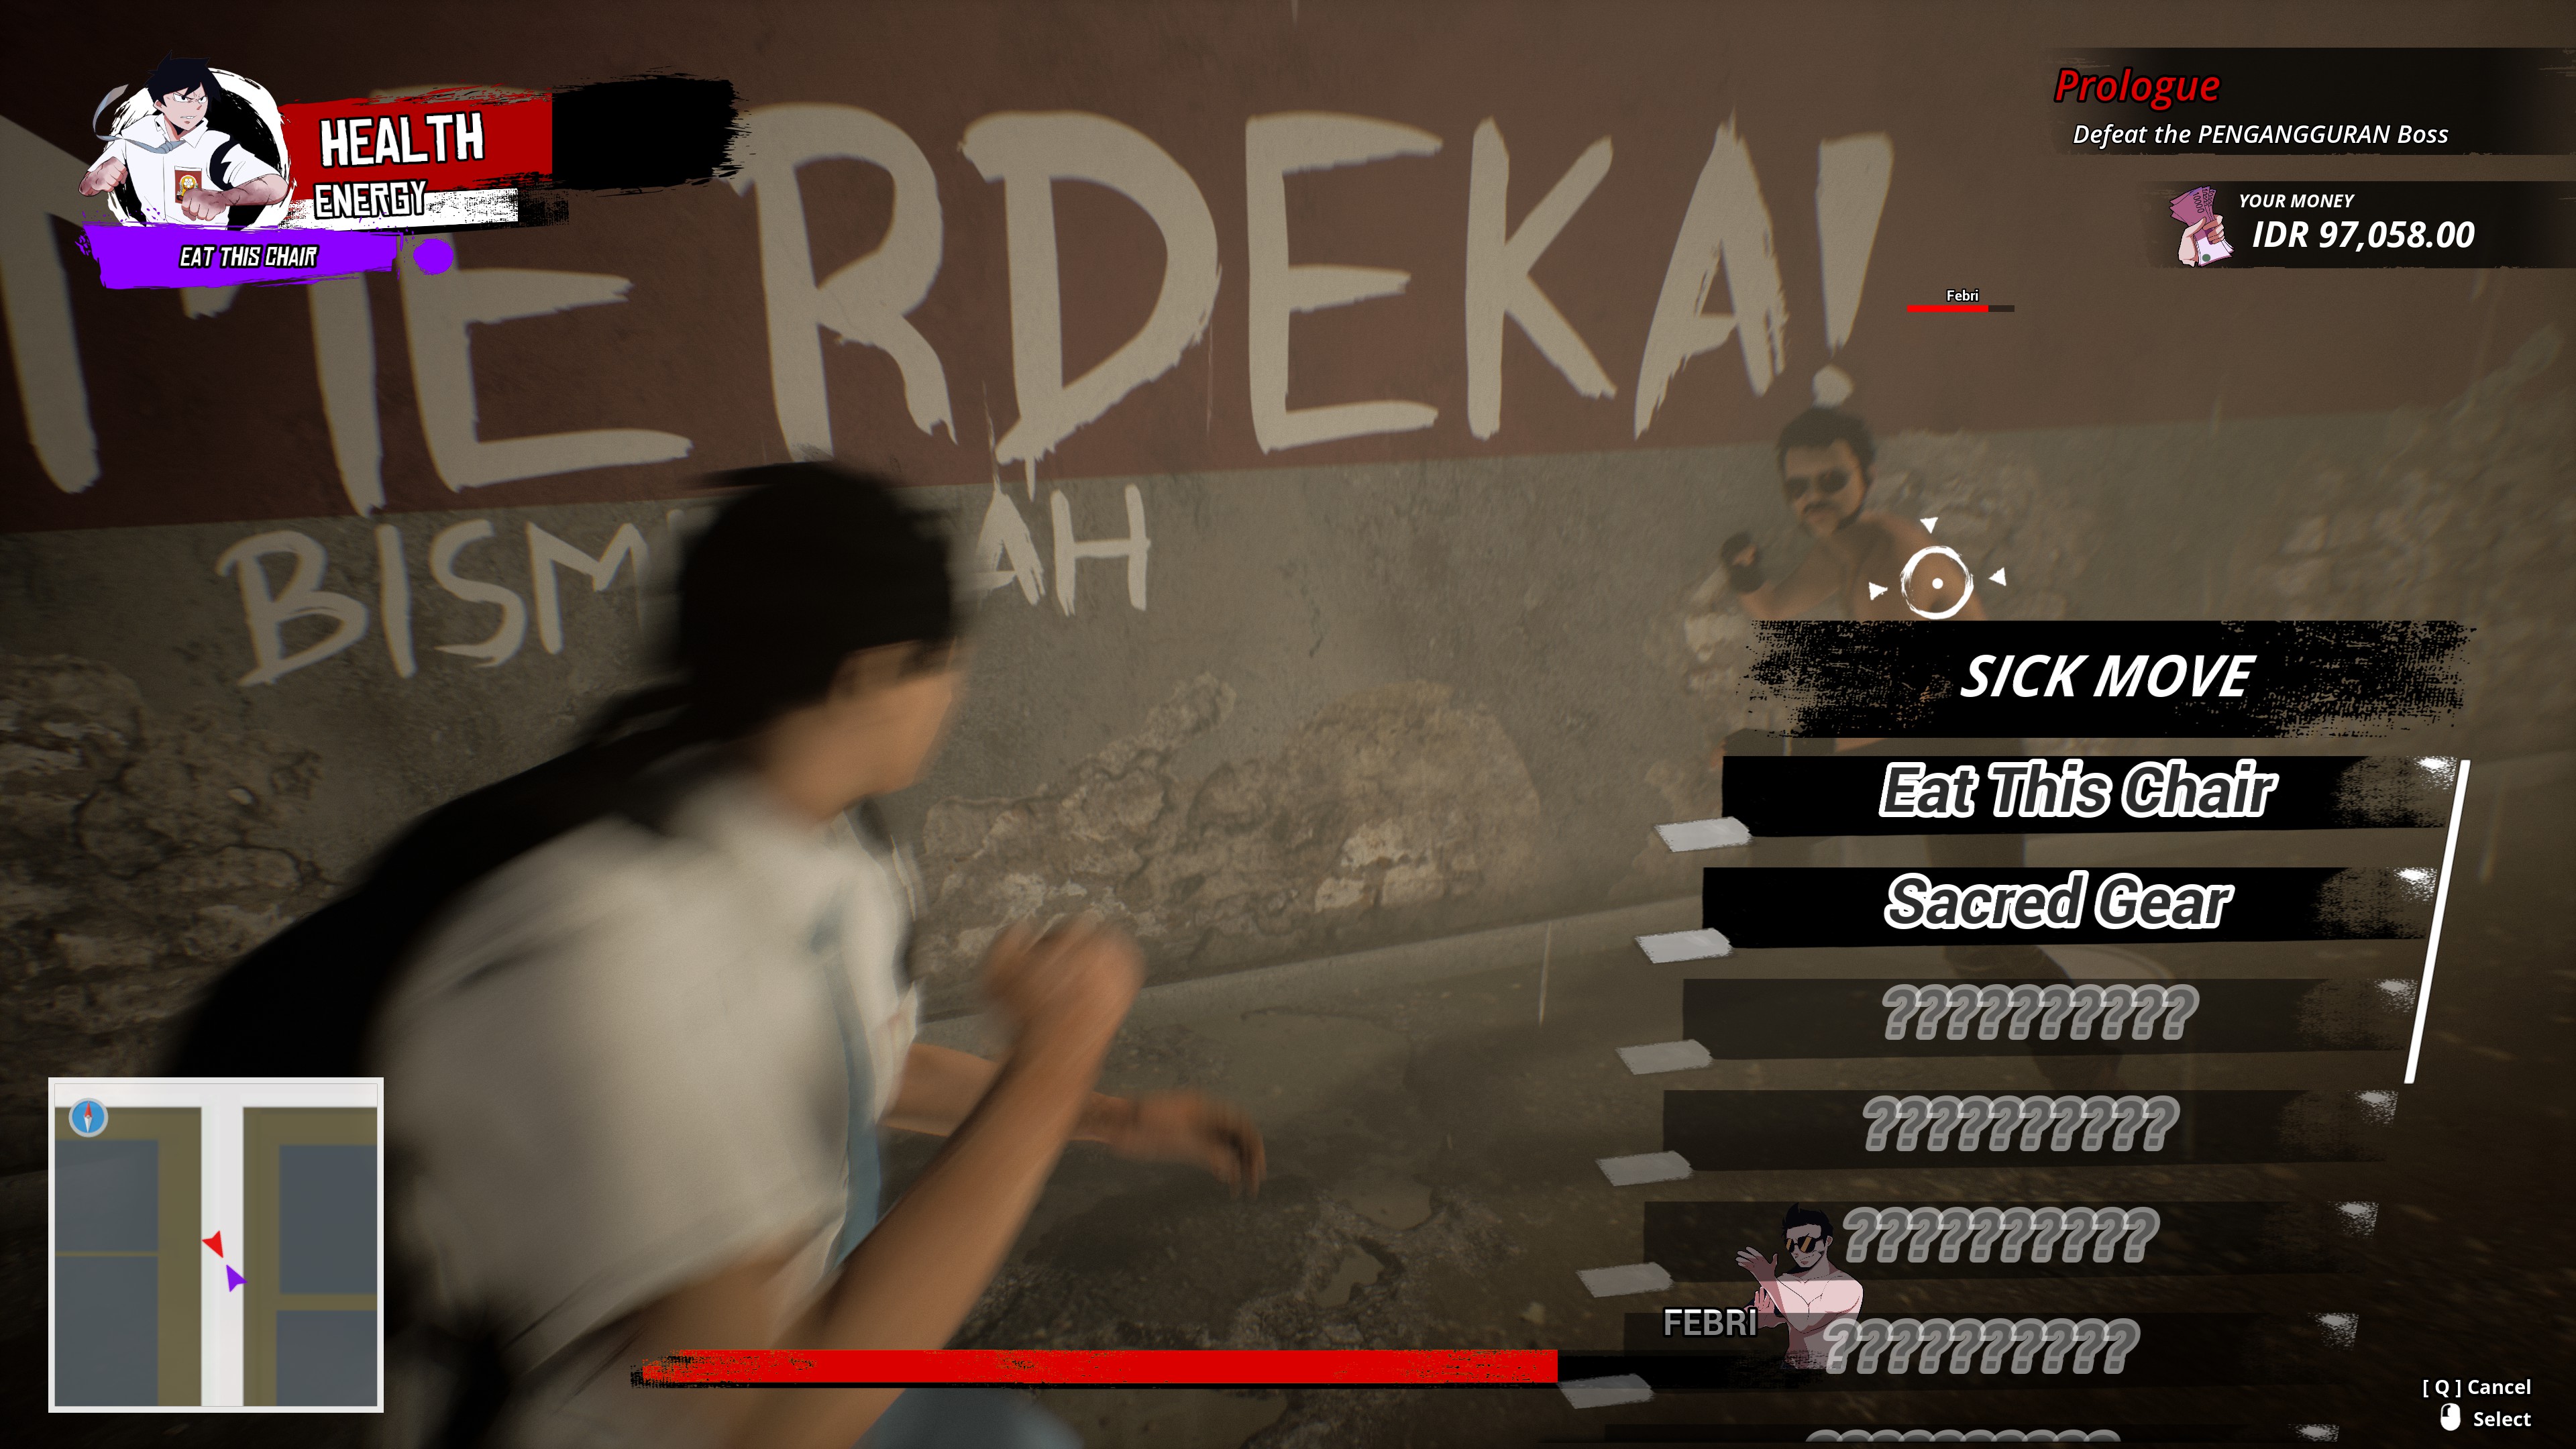 A shot of the Sick Move list from Troublemaker, showing moves called 'Eat This Chair' and 'Sacred Gear'.